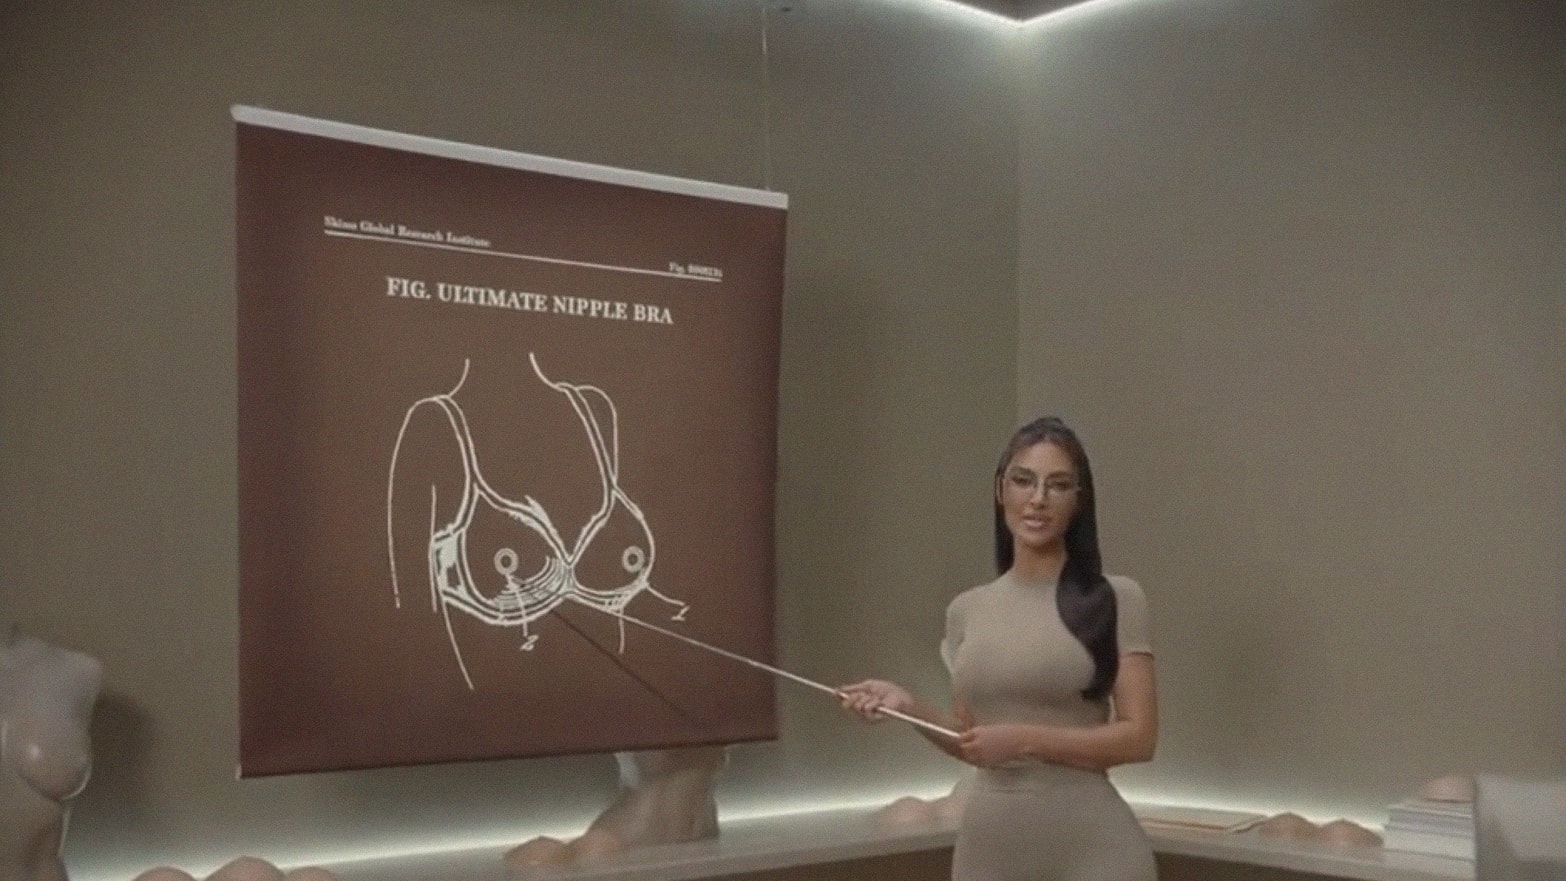 Kim Kardashian uses a pointer to direct attention to a diagram of her shapewear line's new Ultimate Nipple Bra.